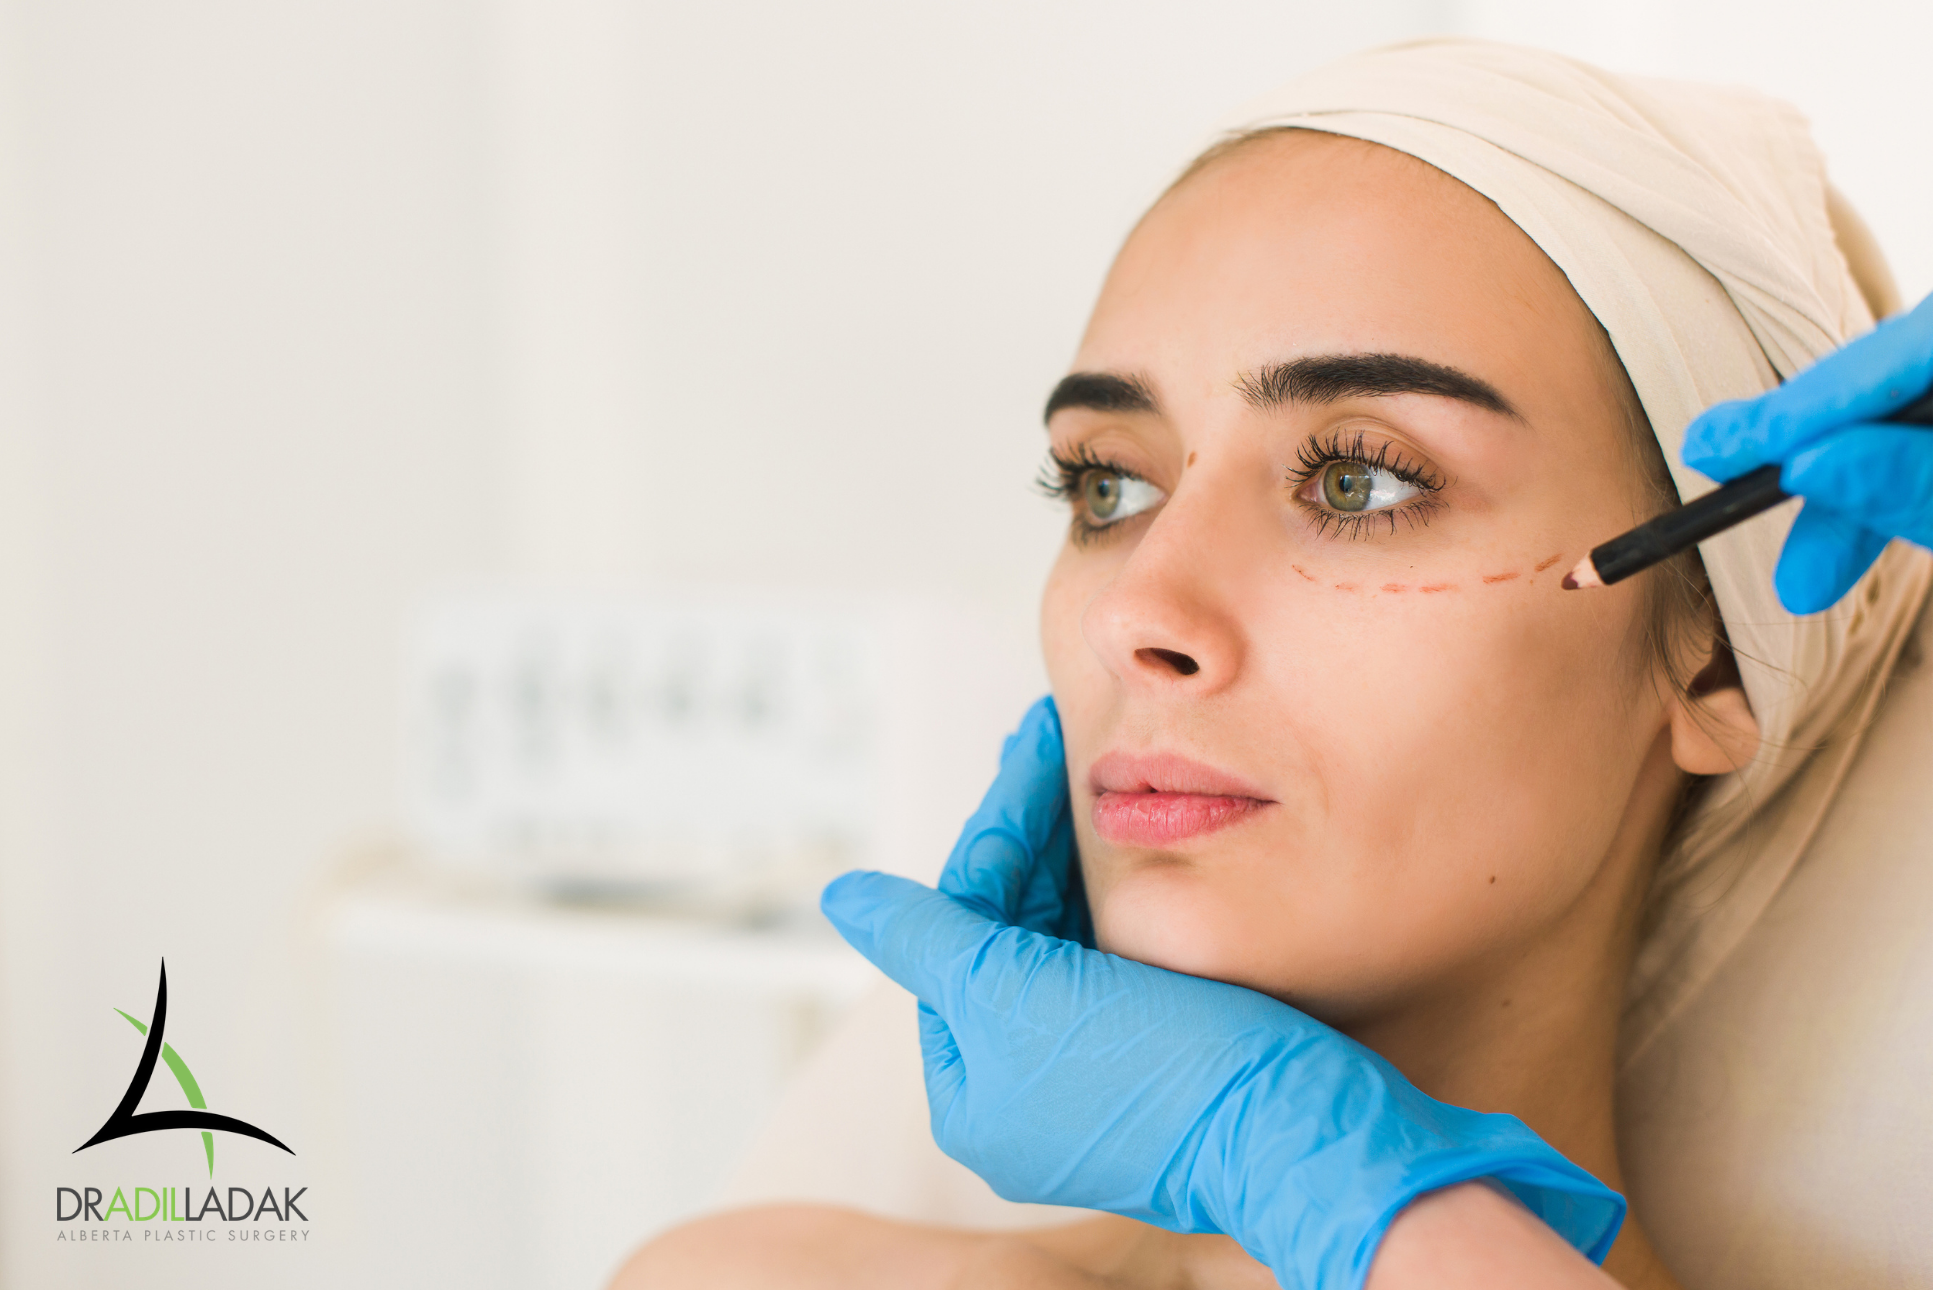 Thinking About Eyelid Surgery? Here Are 5 Tips To Prepare Yourself